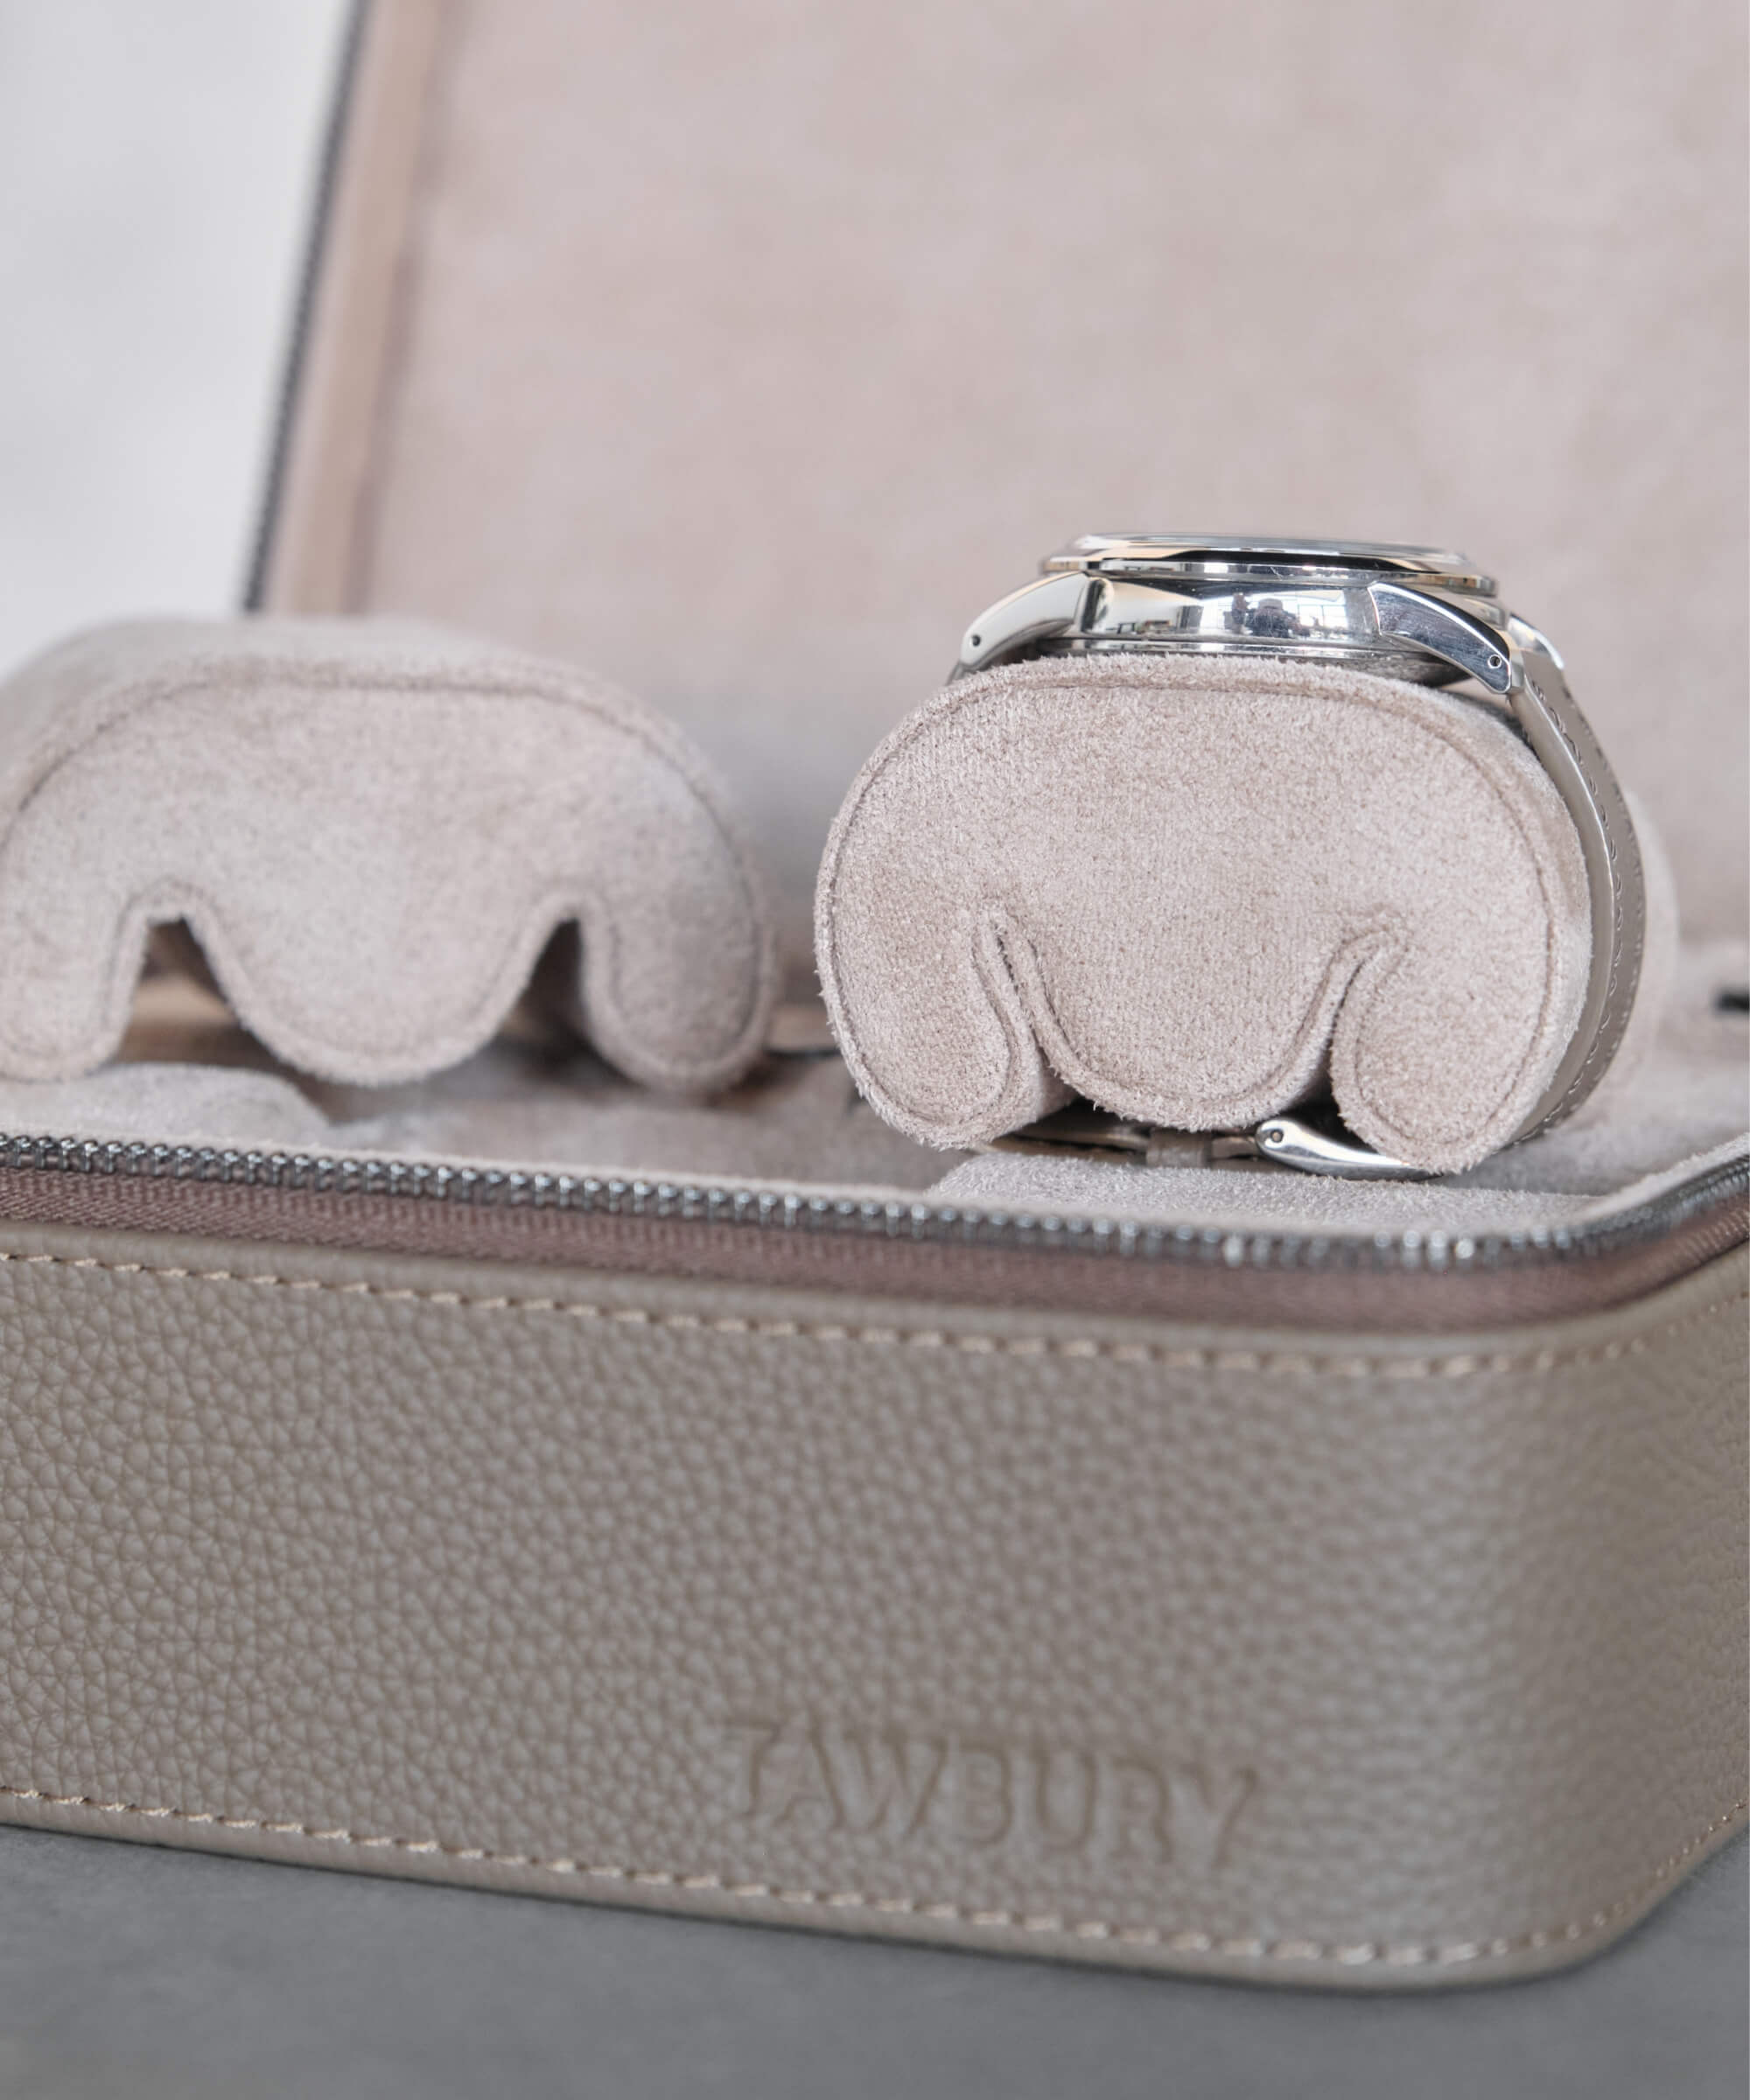 Two Fraser 3 Watch Travel Cases - Taupe by TAWBURY are securely held in a leather case.